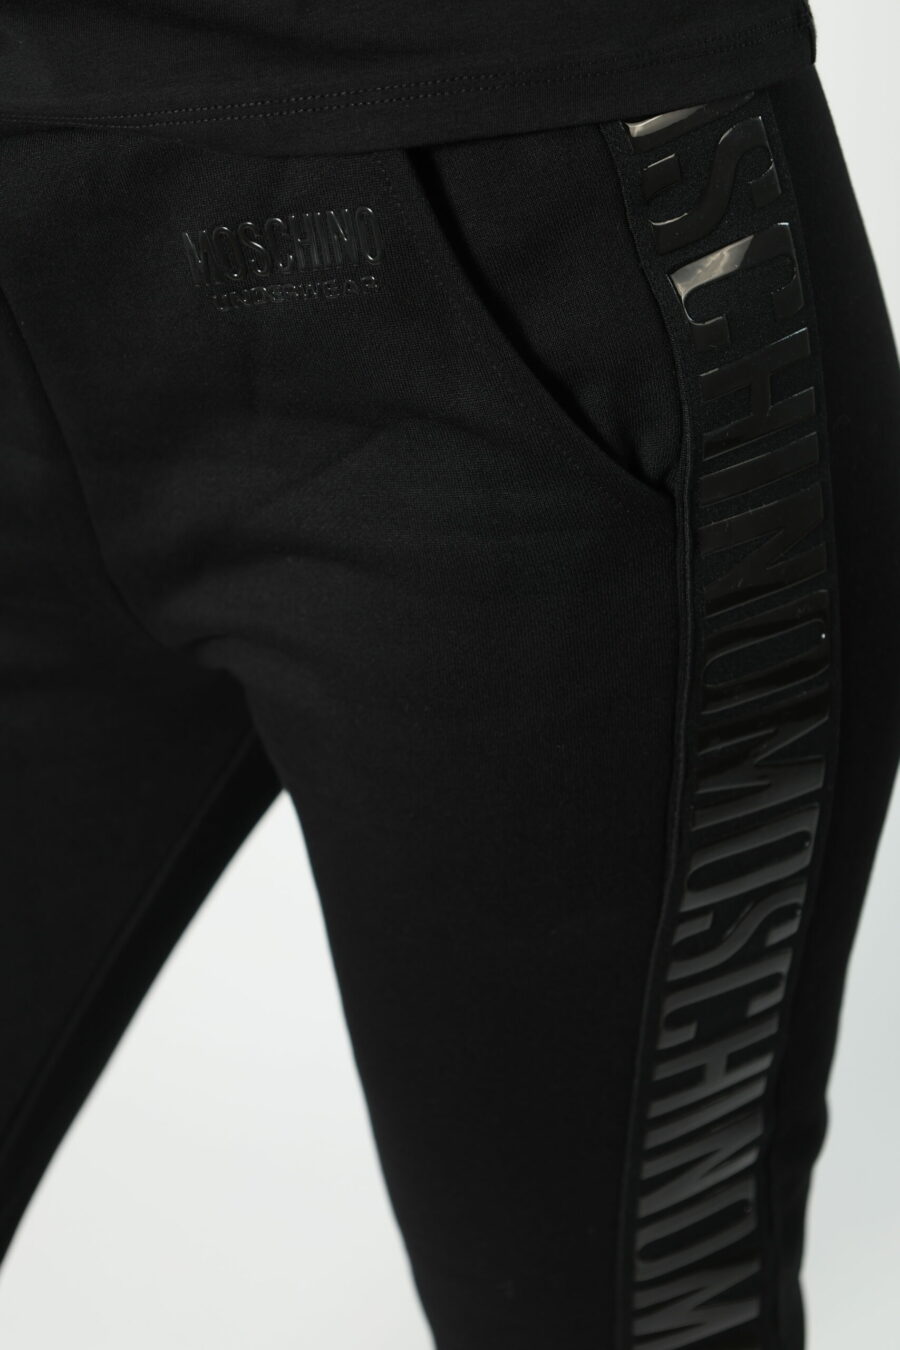 Tracksuit bottoms black with monochrome ribbon logo on sides - 8052865435499 463 scaled